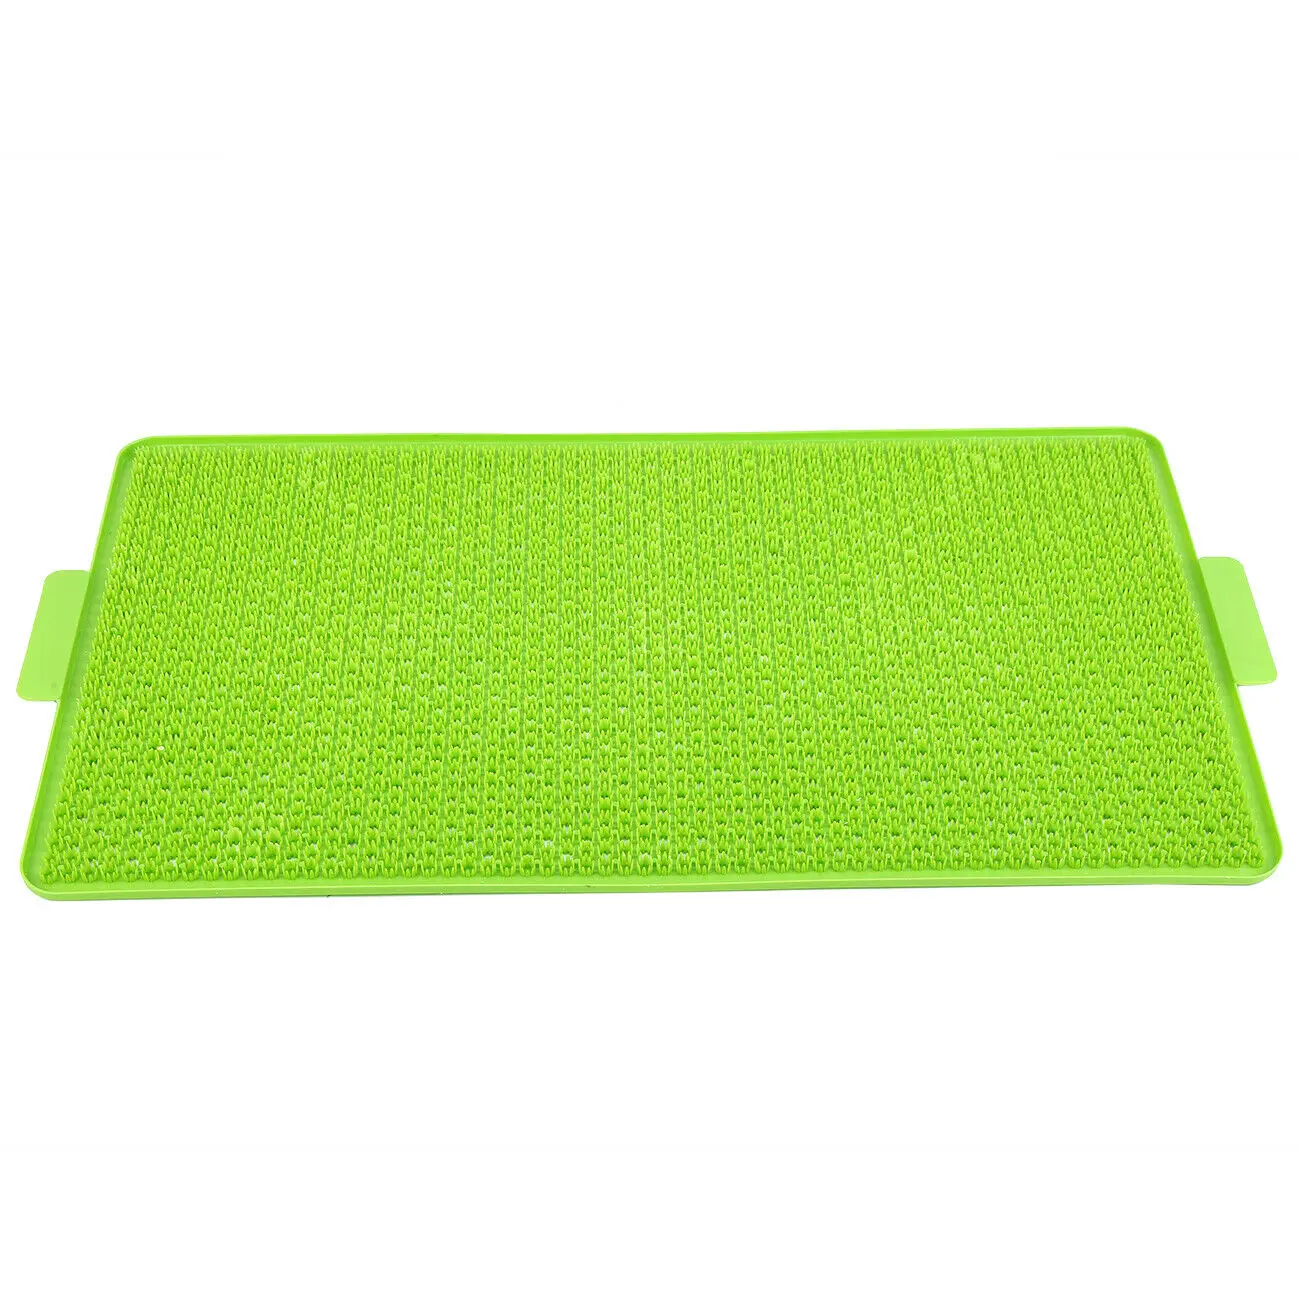 Honhill Portable Dog Training Toilet Potty Pet Puppy Litter Toilet Tray Pad Mat For Dogs Cats Easy to Clean Pet Product Indoor H